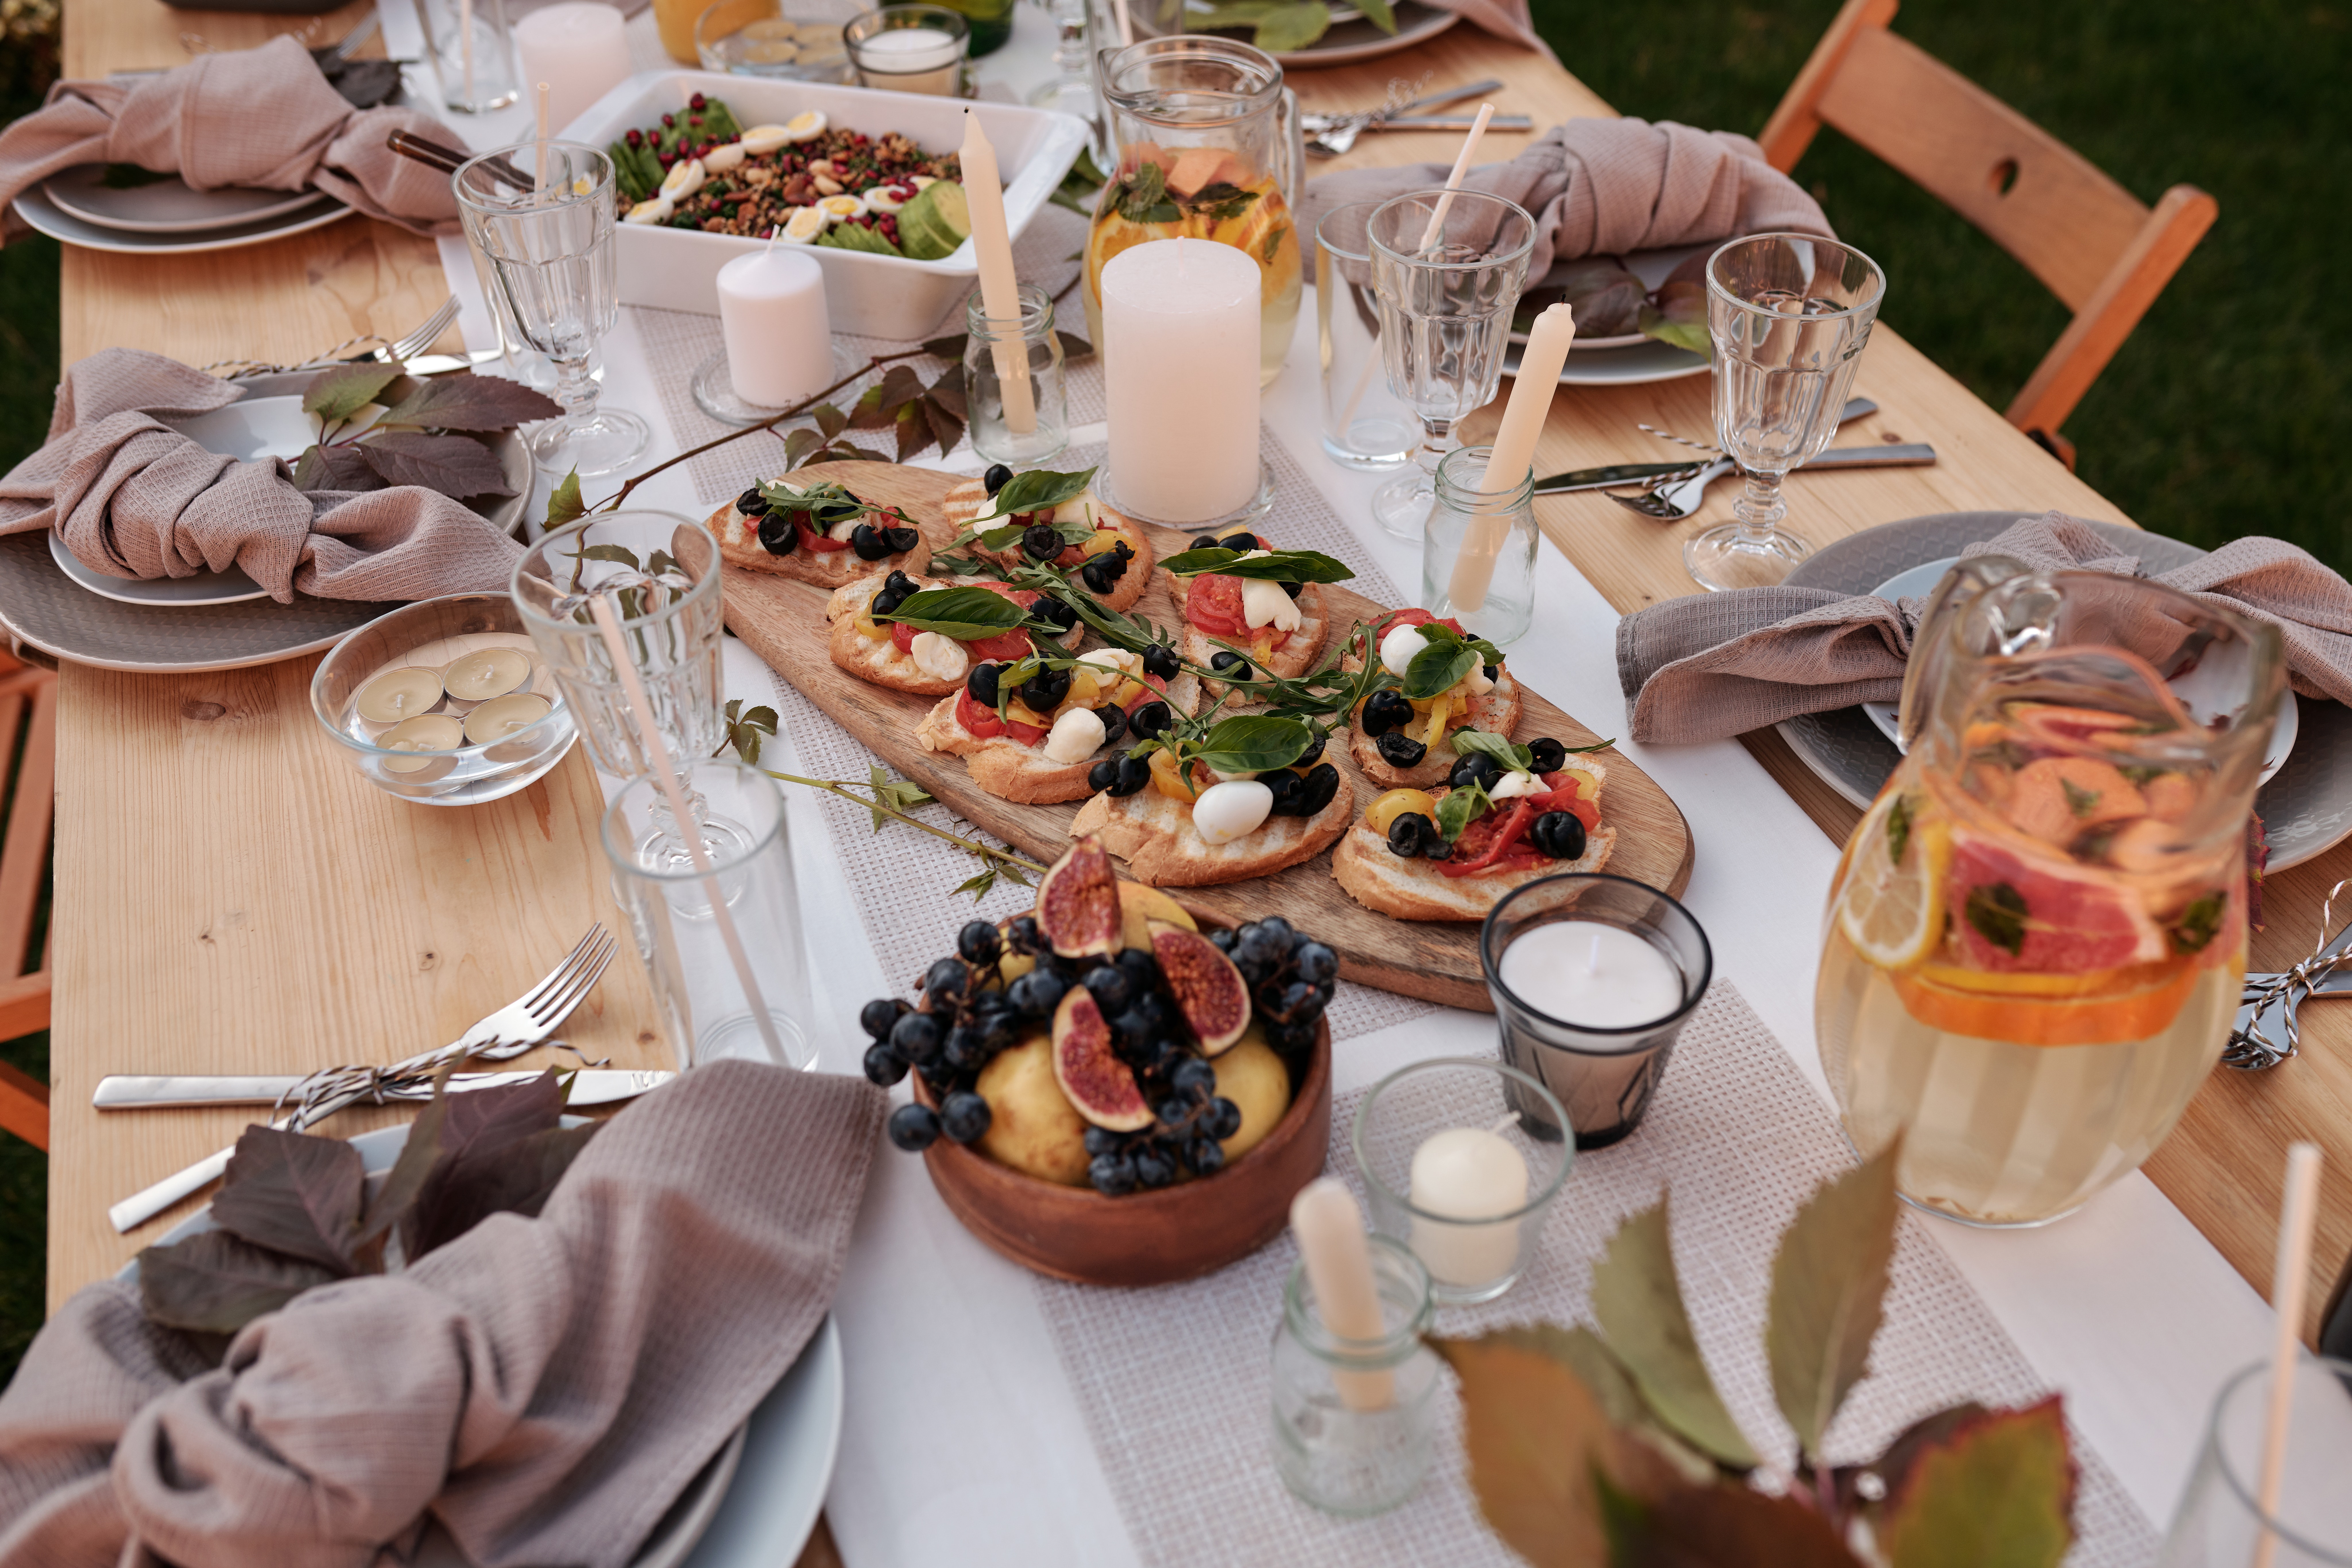 catering at an event - event planning tips 